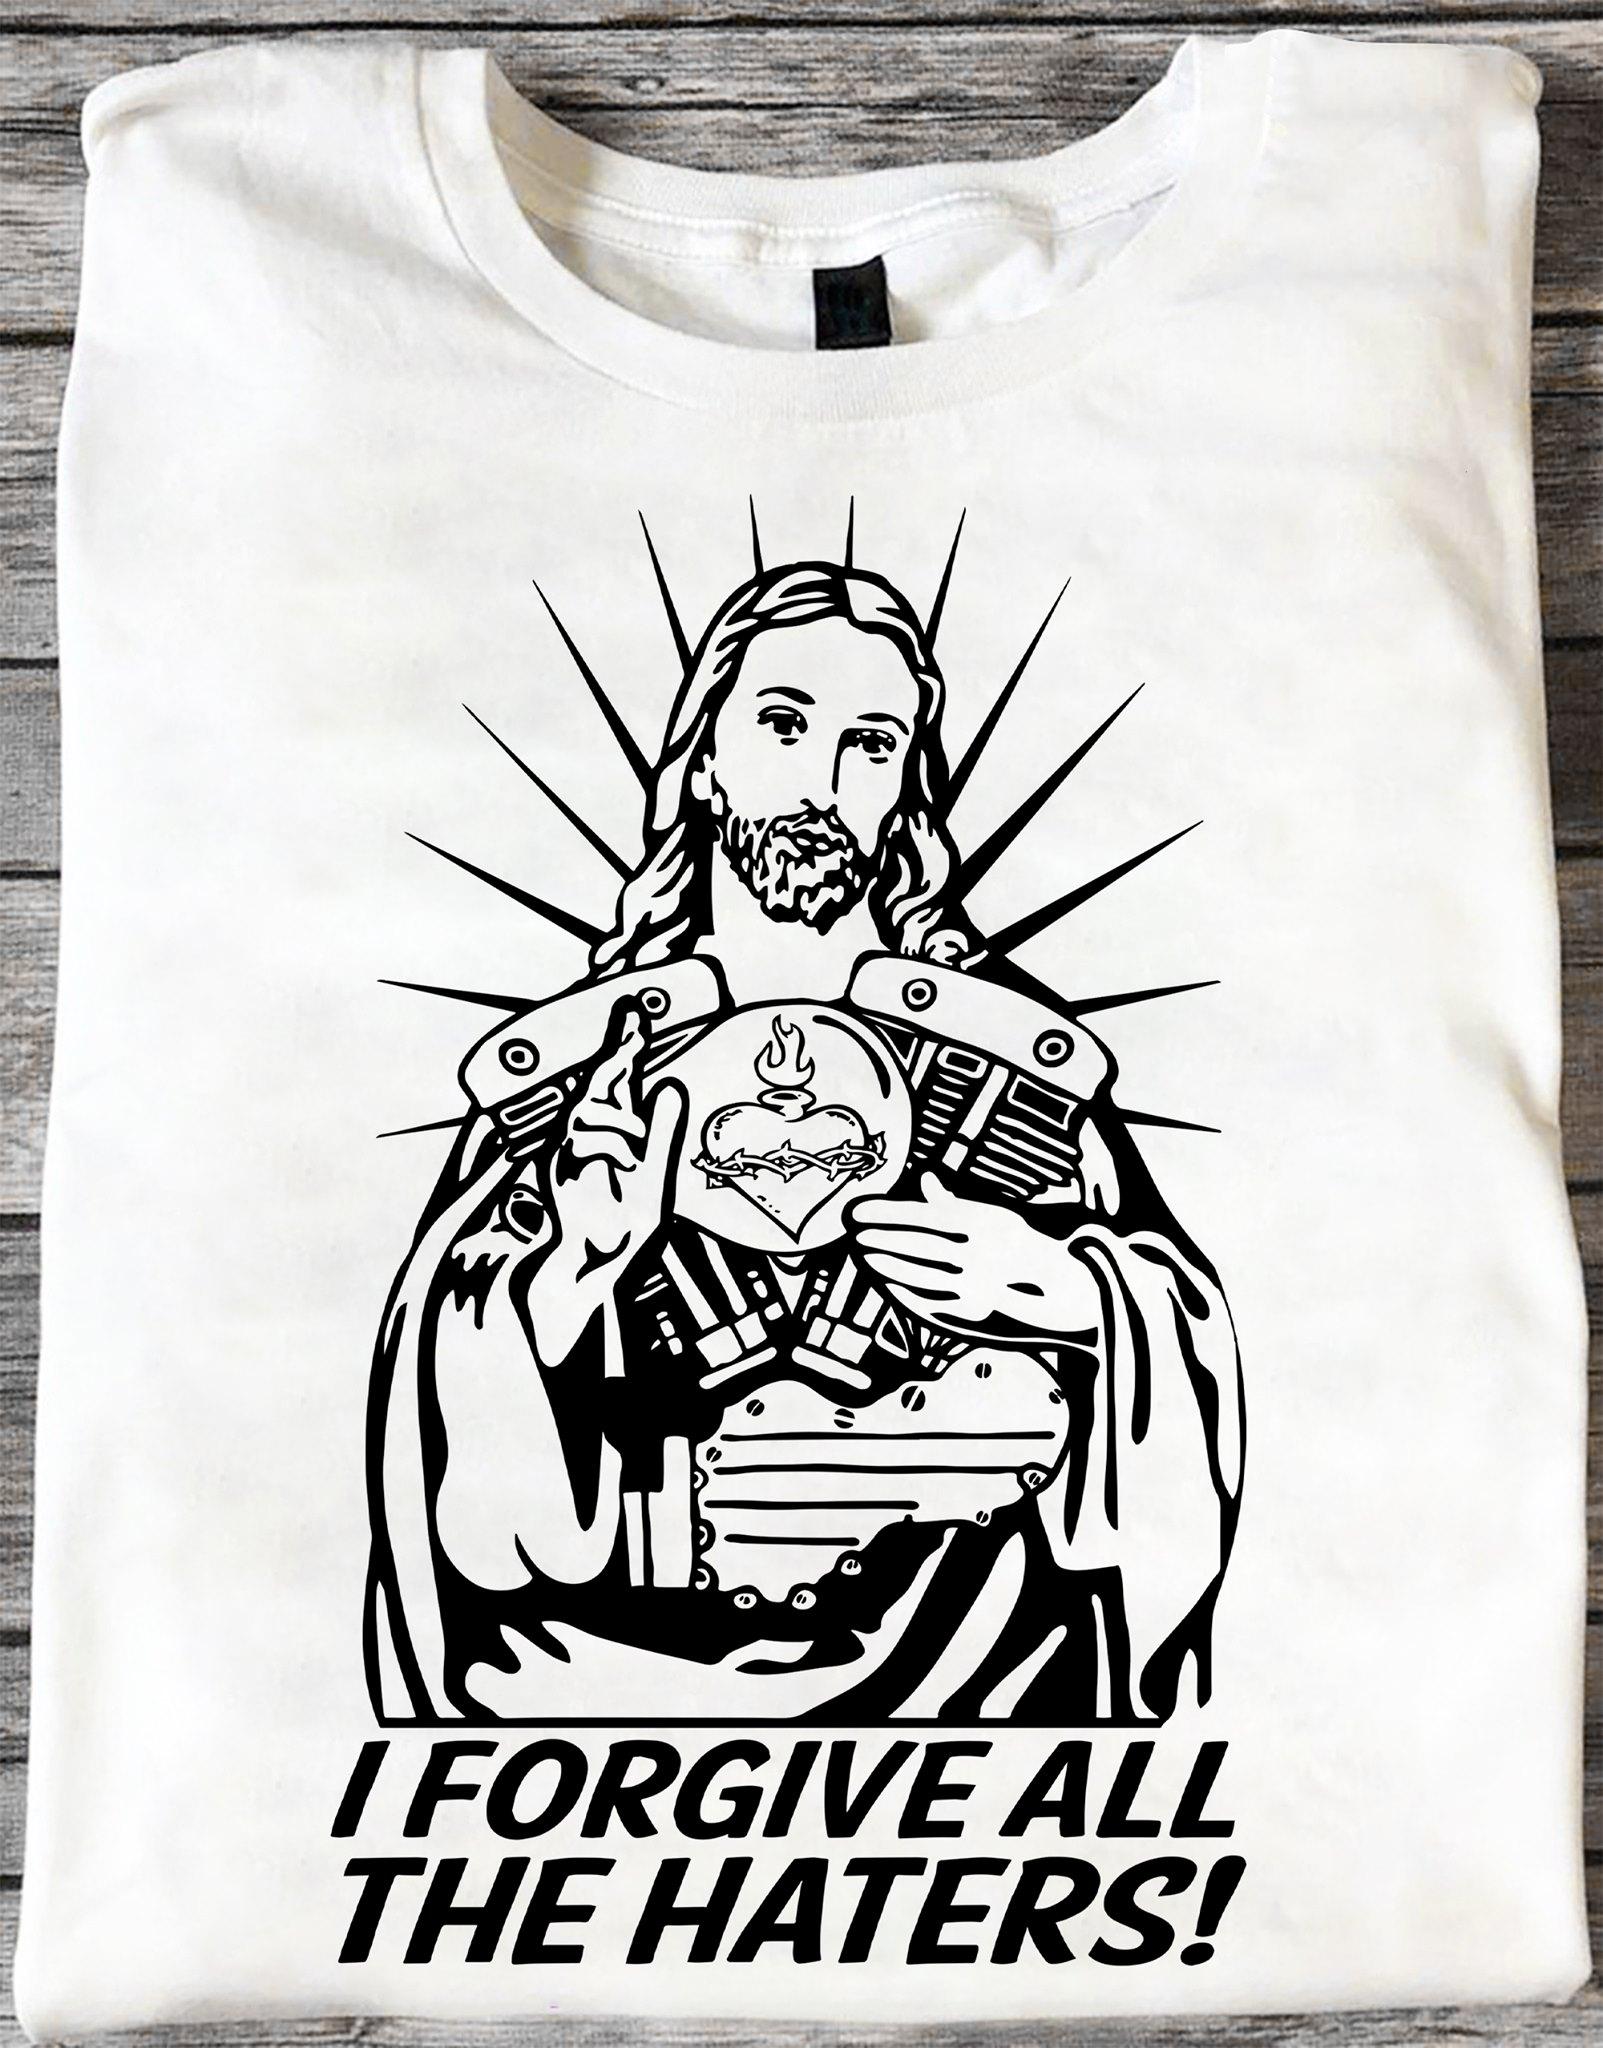 I forgive all the haters! - Motorcycle Engine Jesus